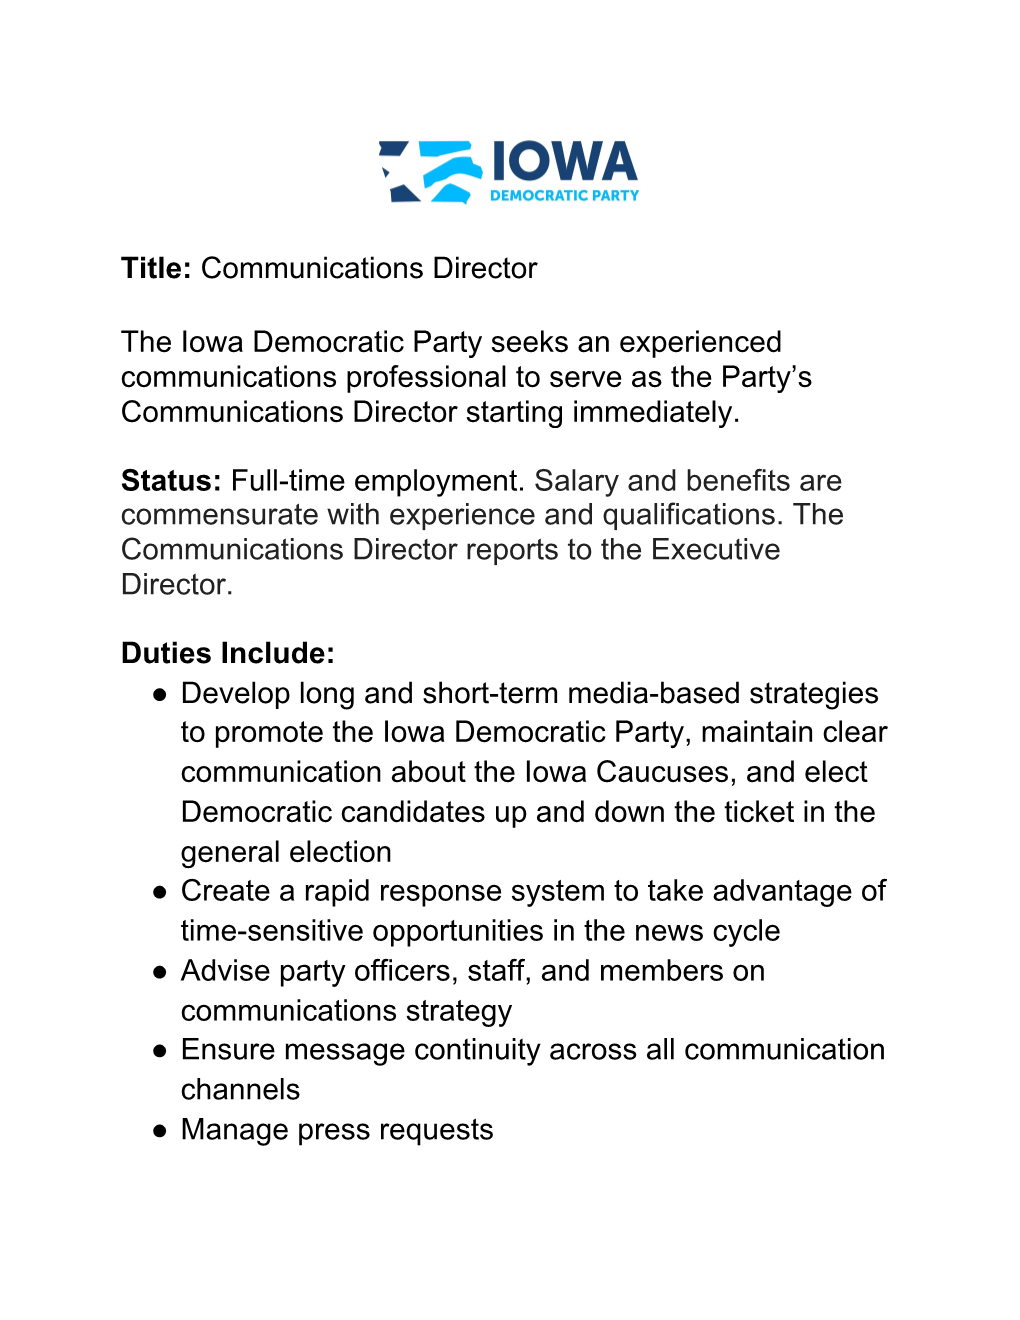 Title: ​Communications Director the Iowa Democratic Party Seeks An